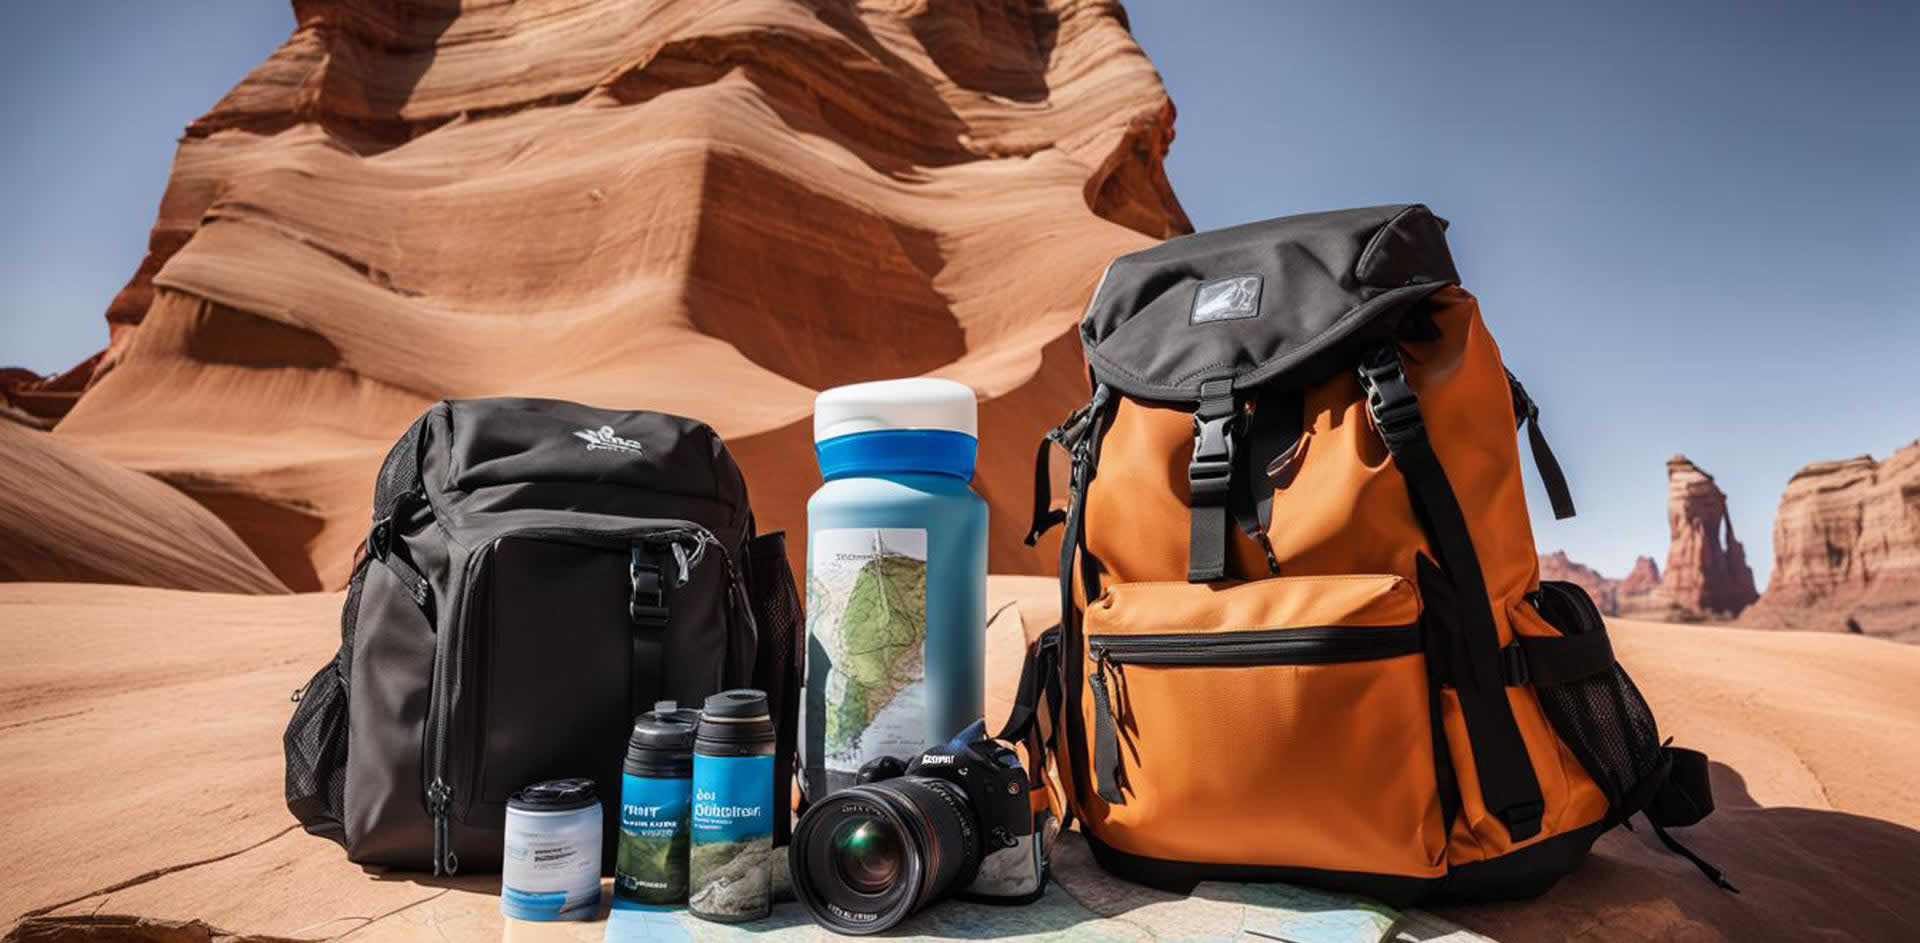 Essential packing tips for visiting Antelope Canyon